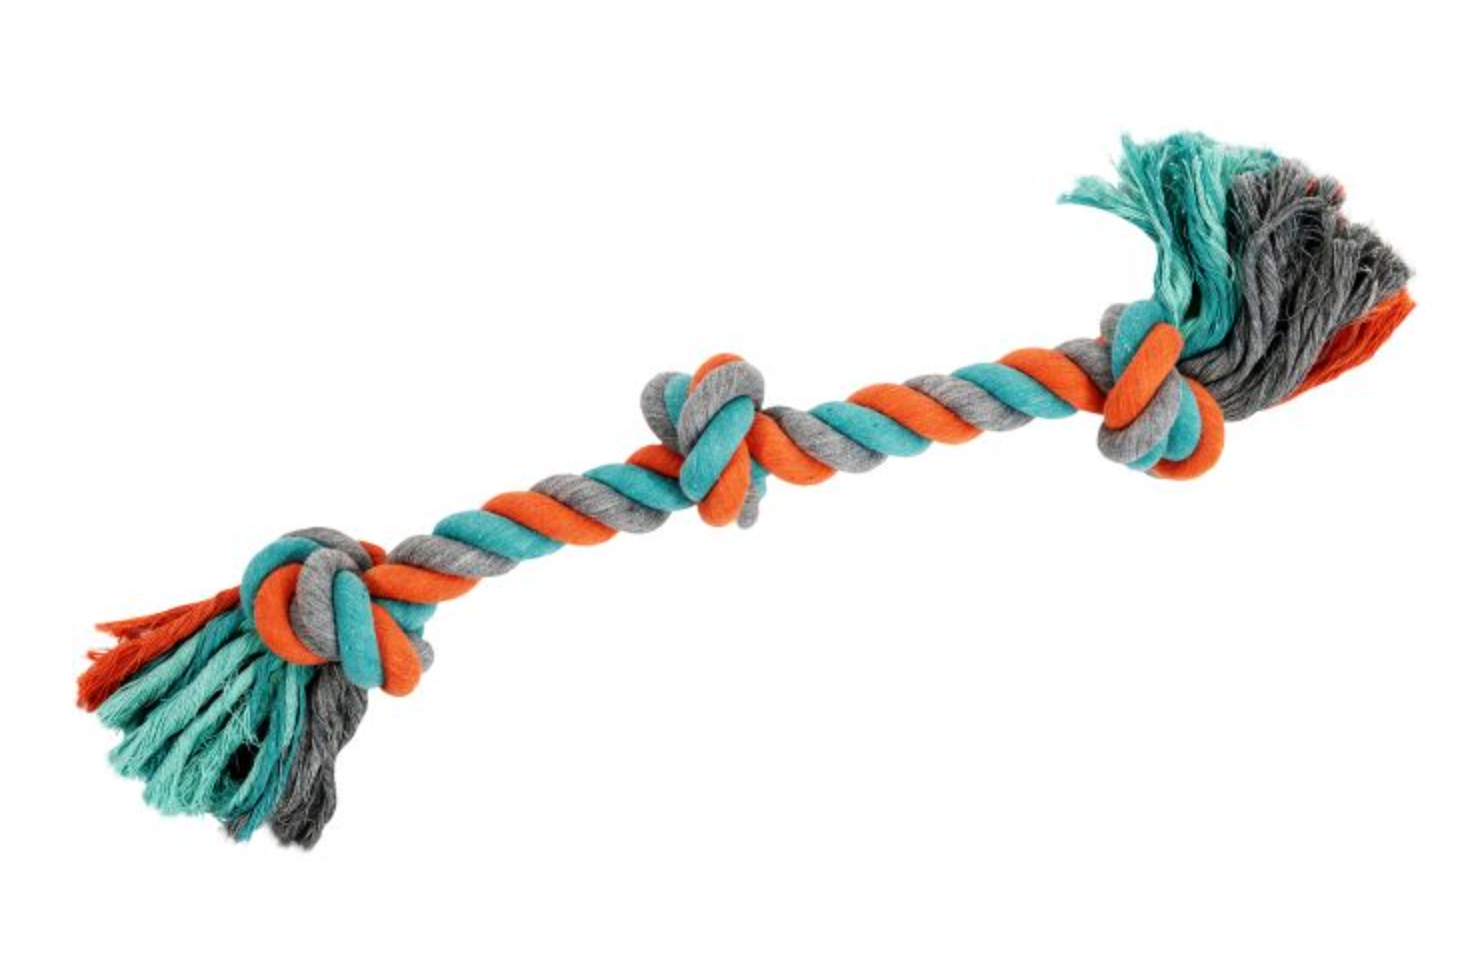 Bud'z Rope With 3 Knots - Orange And Blue Dog Toy (23.5")